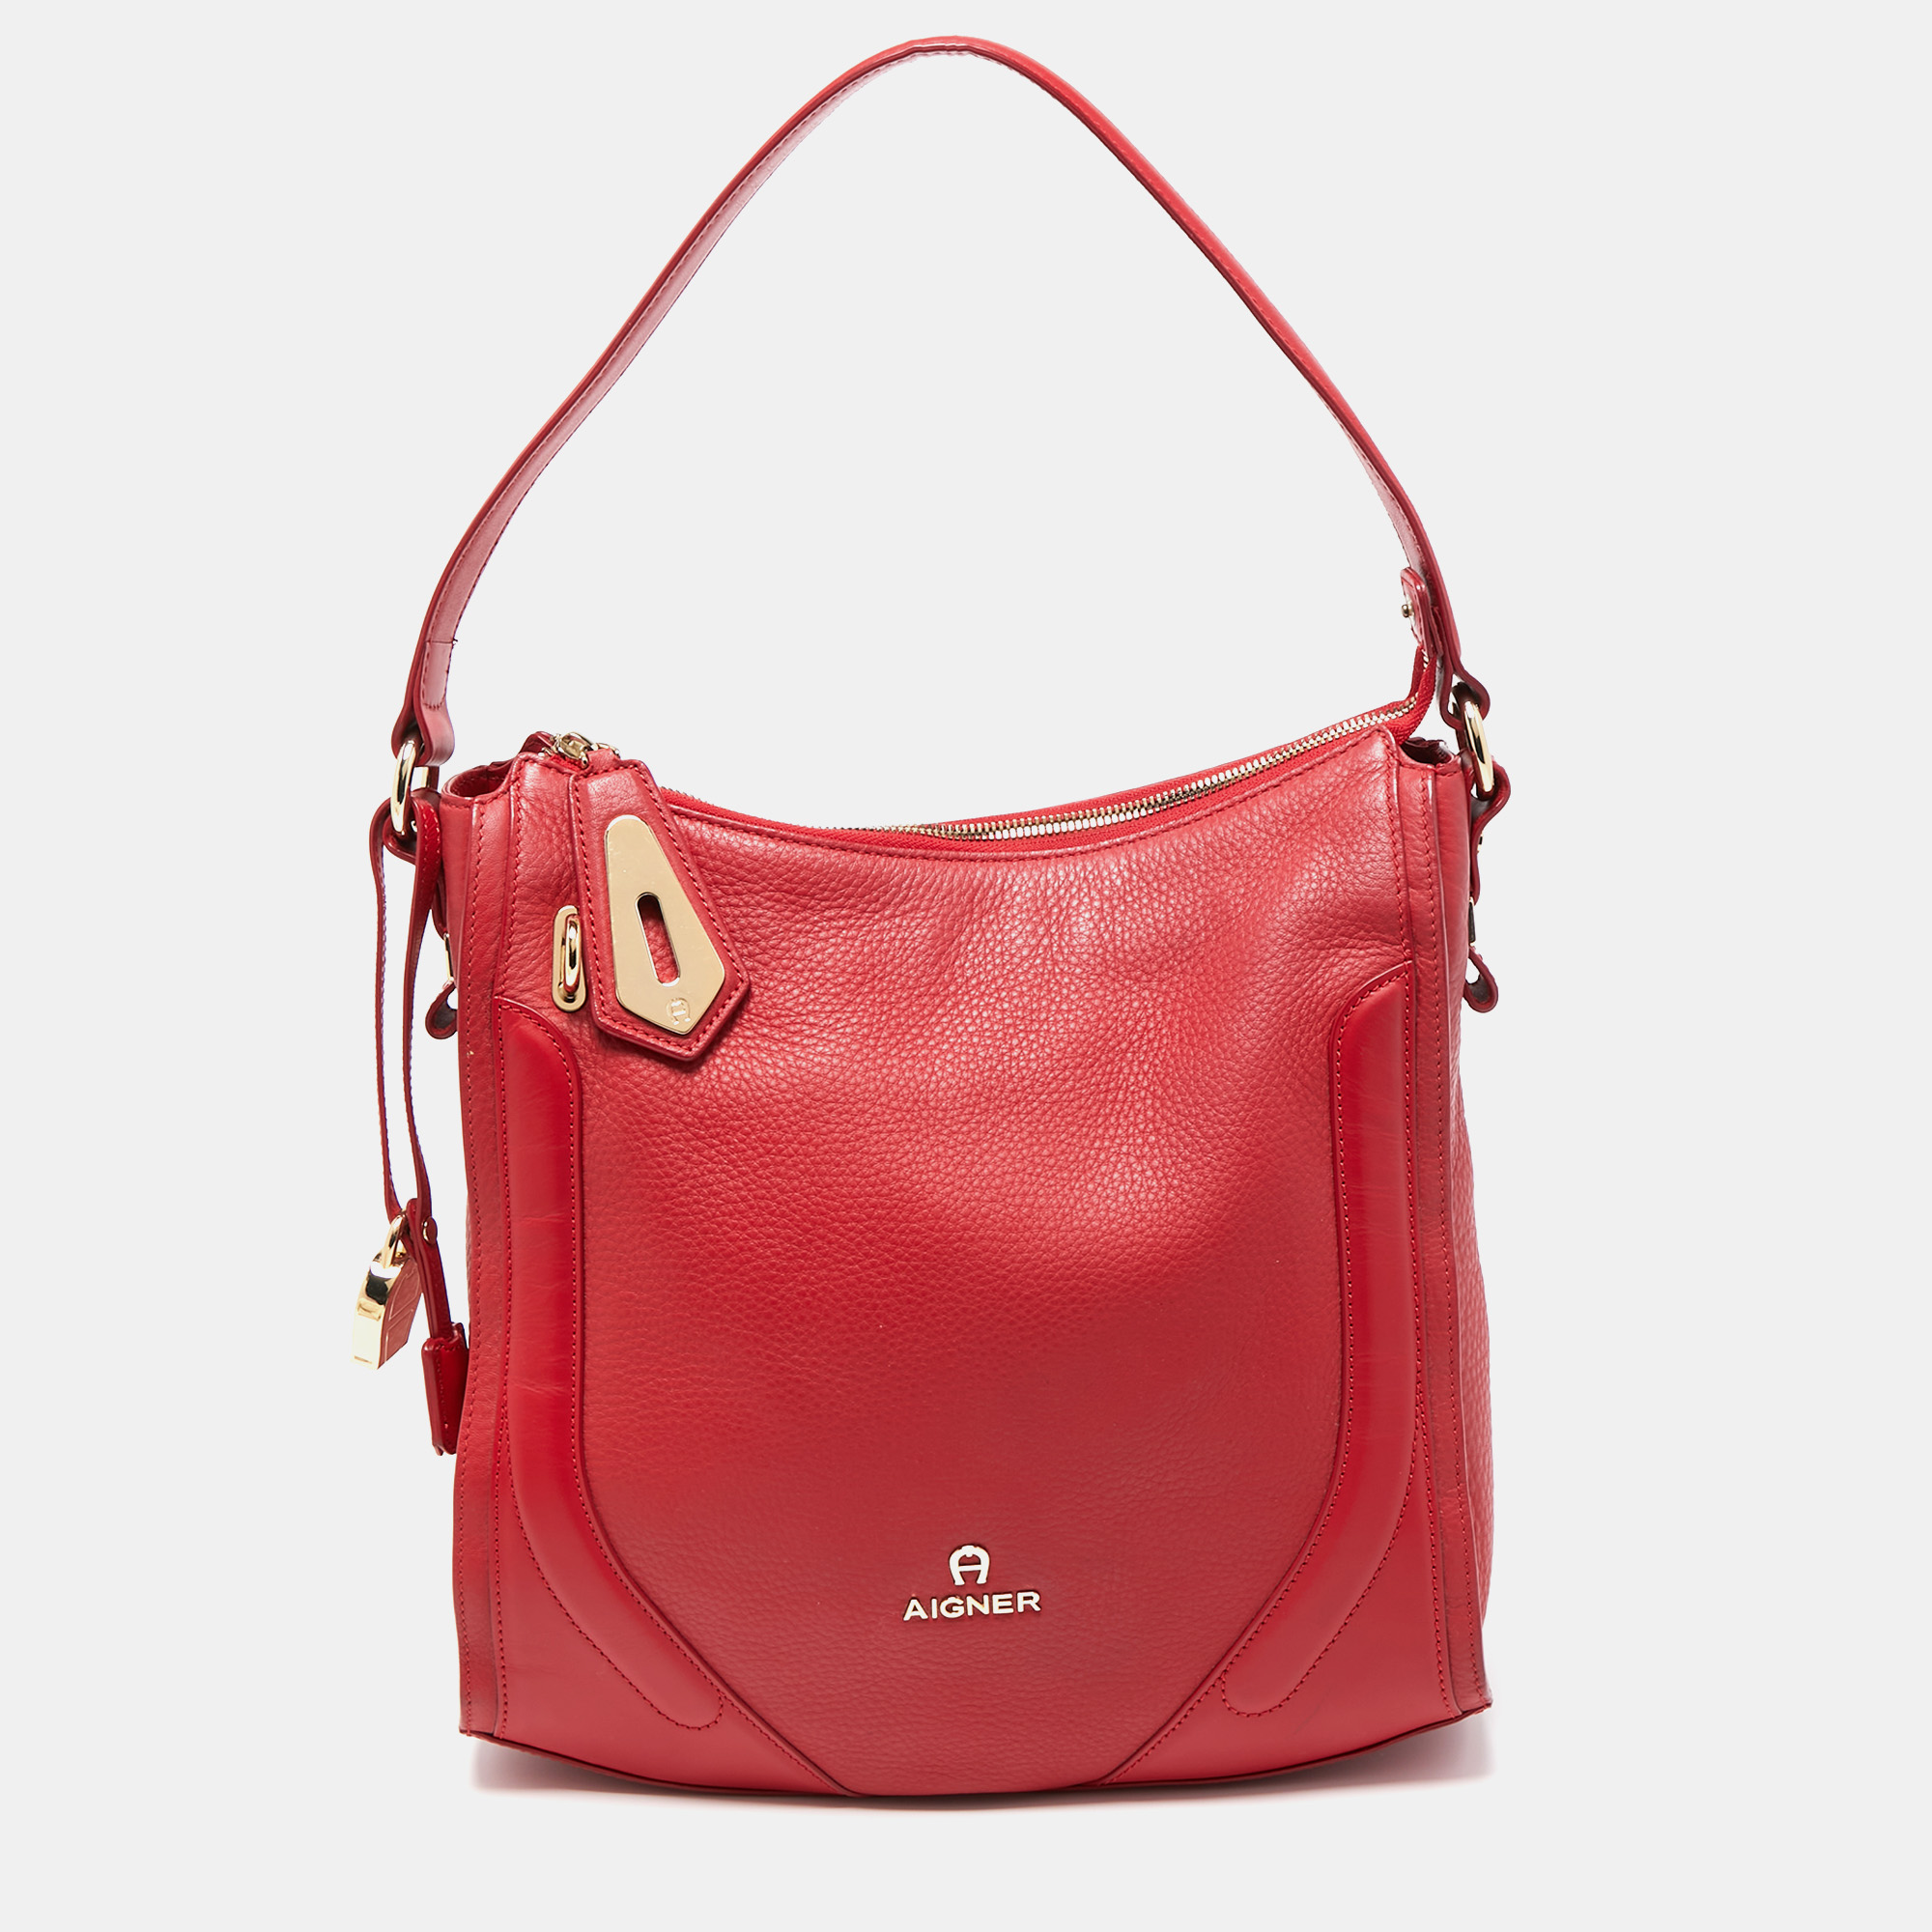 Stylish handbags never fail to make a fashionable impression. Make this designer hobo yours by pairing it with your sophisticated workwear as well as playful casual looks.